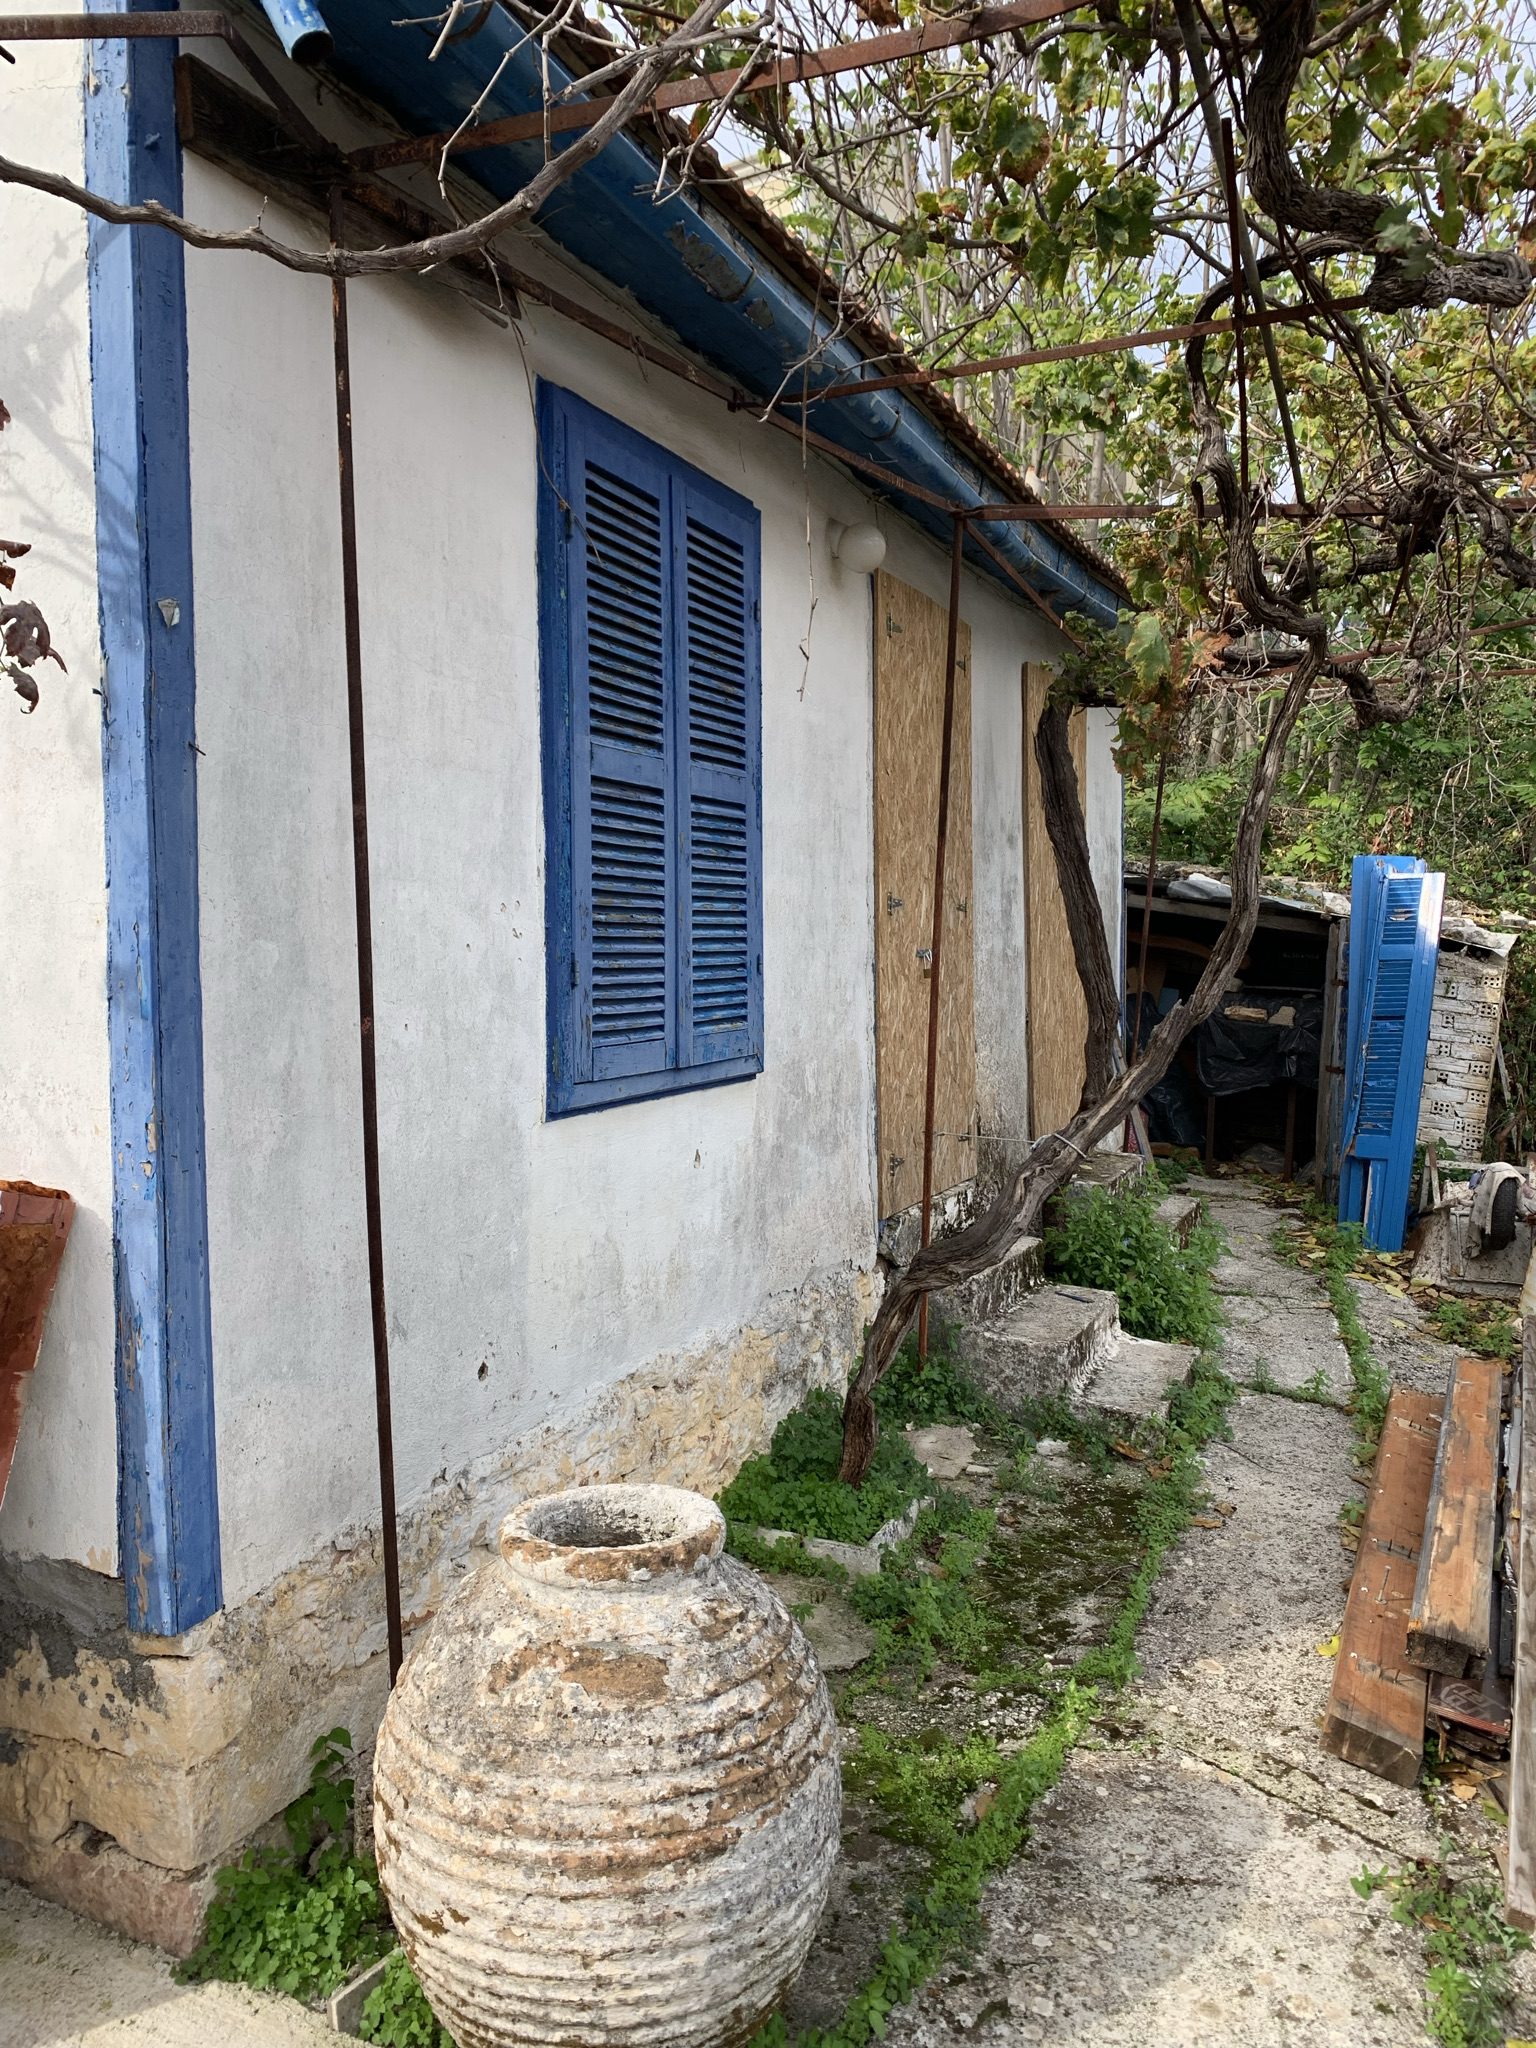 Exterior of house for sale on Ithaca Greece, Vathi